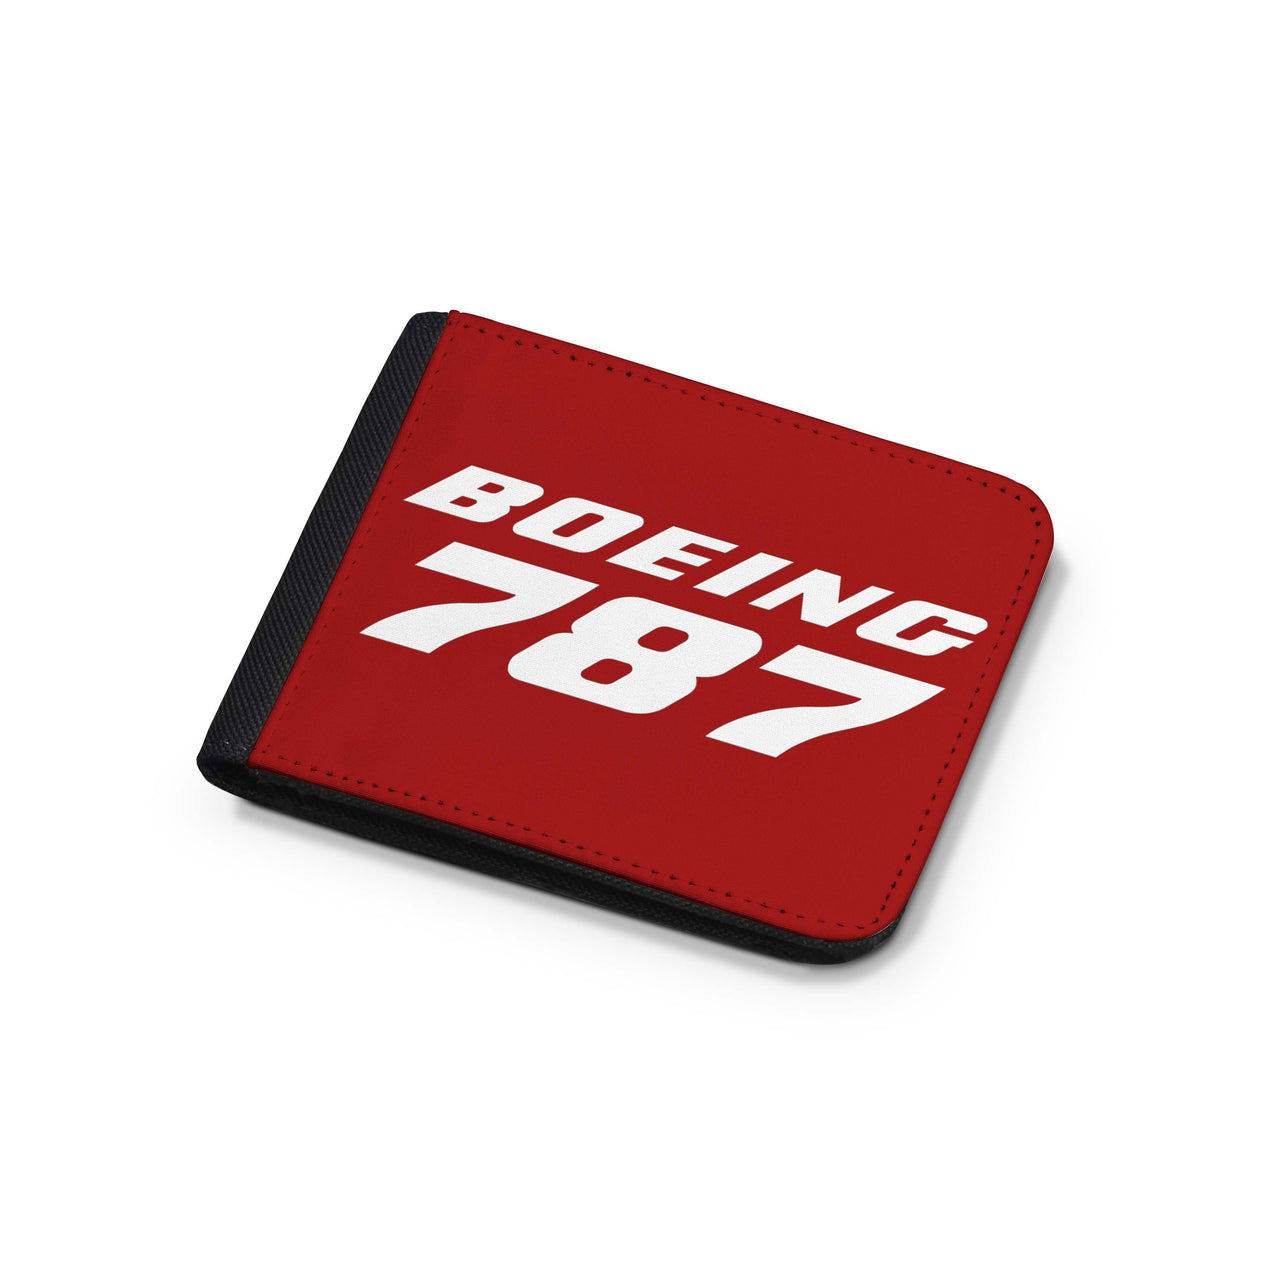 Boeing 787 & Text Designed Wallets